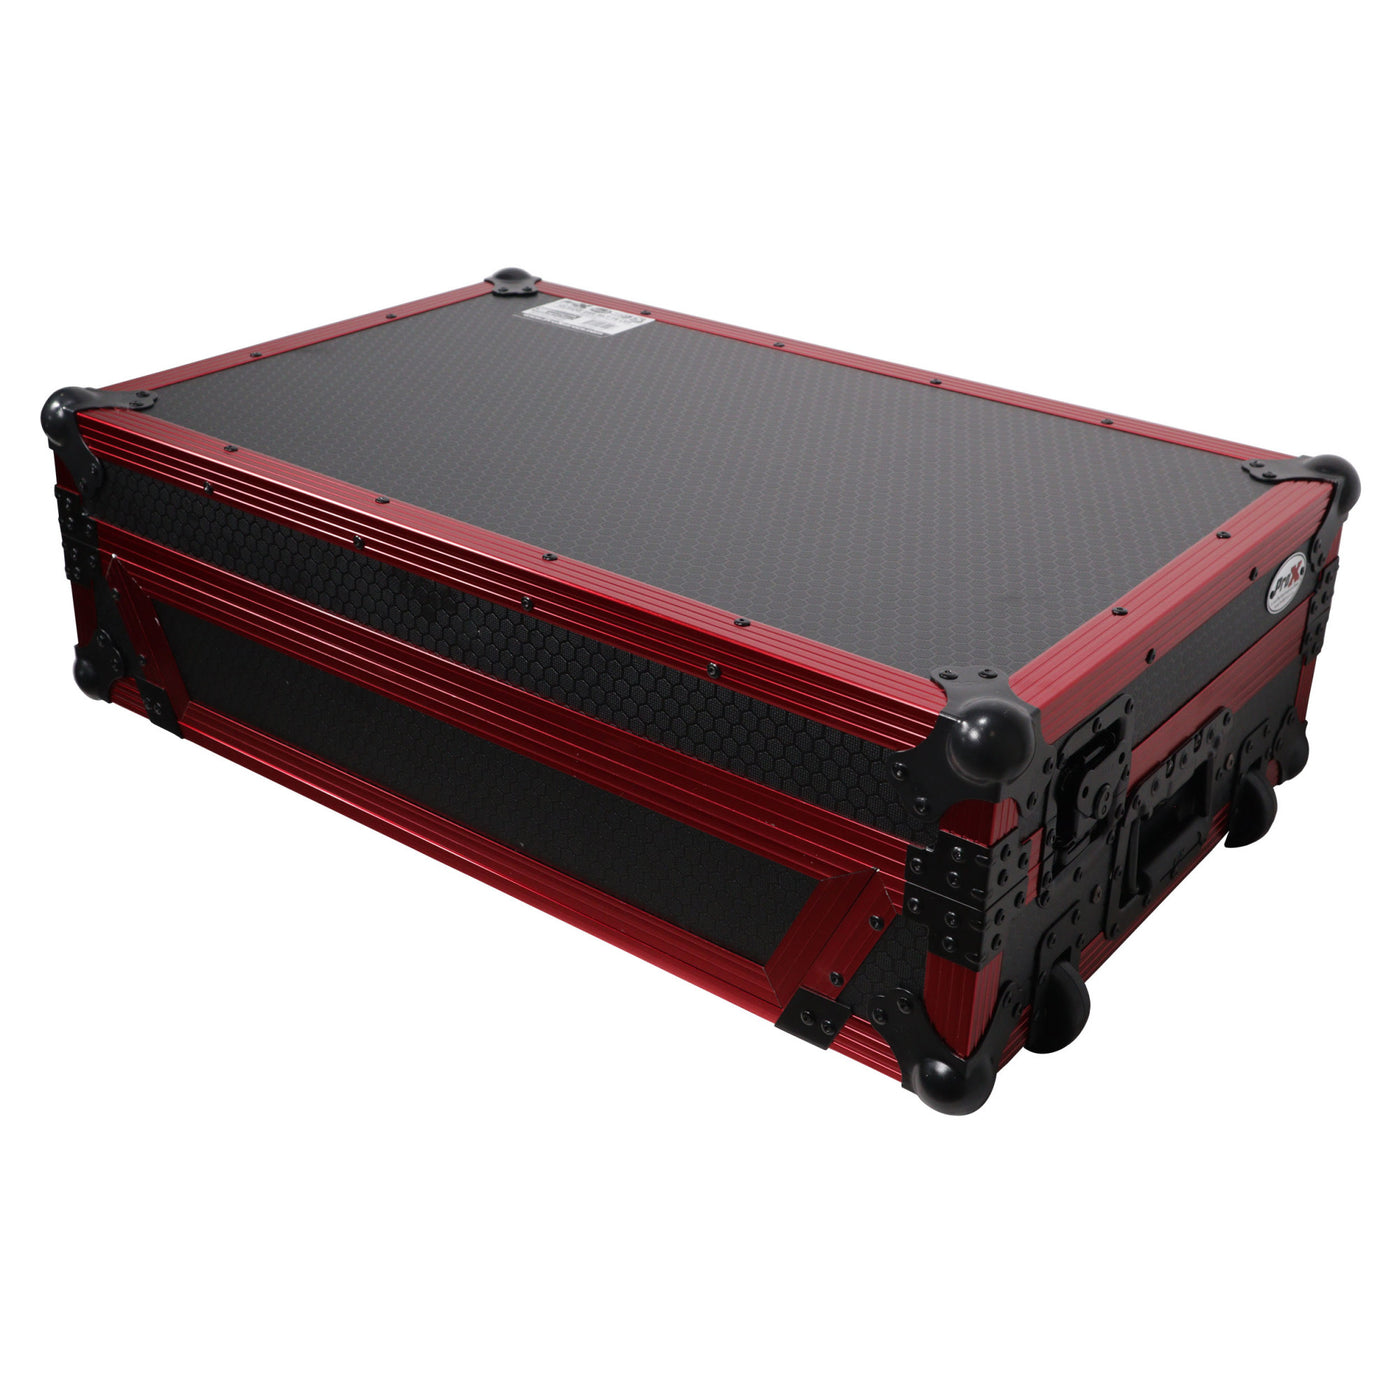 ProX XS-RANEONEWLTFRLED ATA Flight Style Road Case, For RANE ONE DJ Controller, With Sliding Laptop Shelf, Wheels, and LED Kit, Pro Audio Equipment Storage, Limited Edition Red